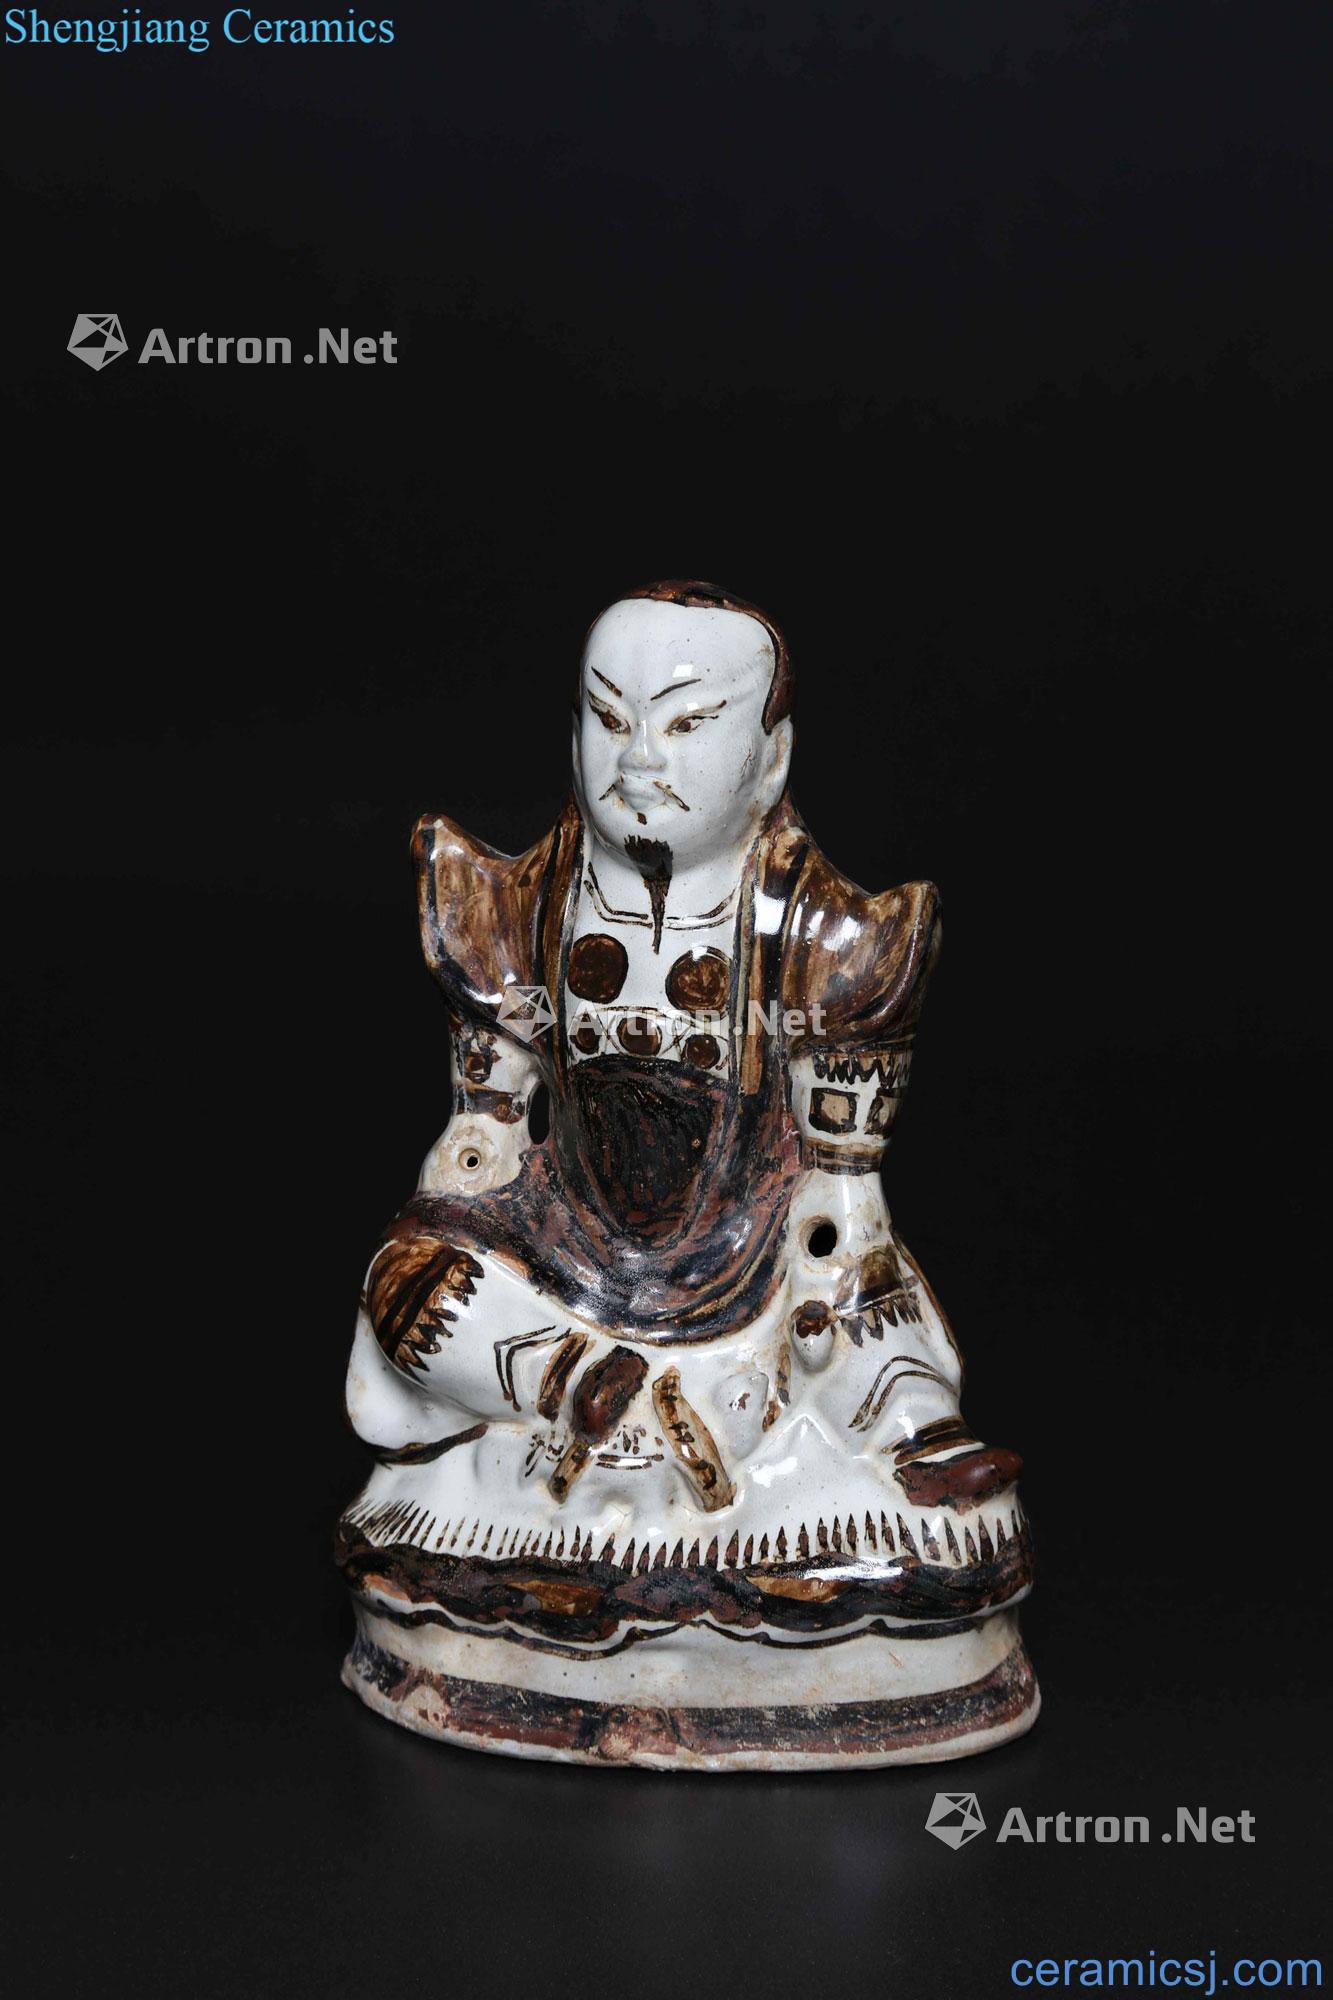 Yuan/Ming dynasty PORCELAIN A statute DEPICTING ¨ GUAND) CHINA